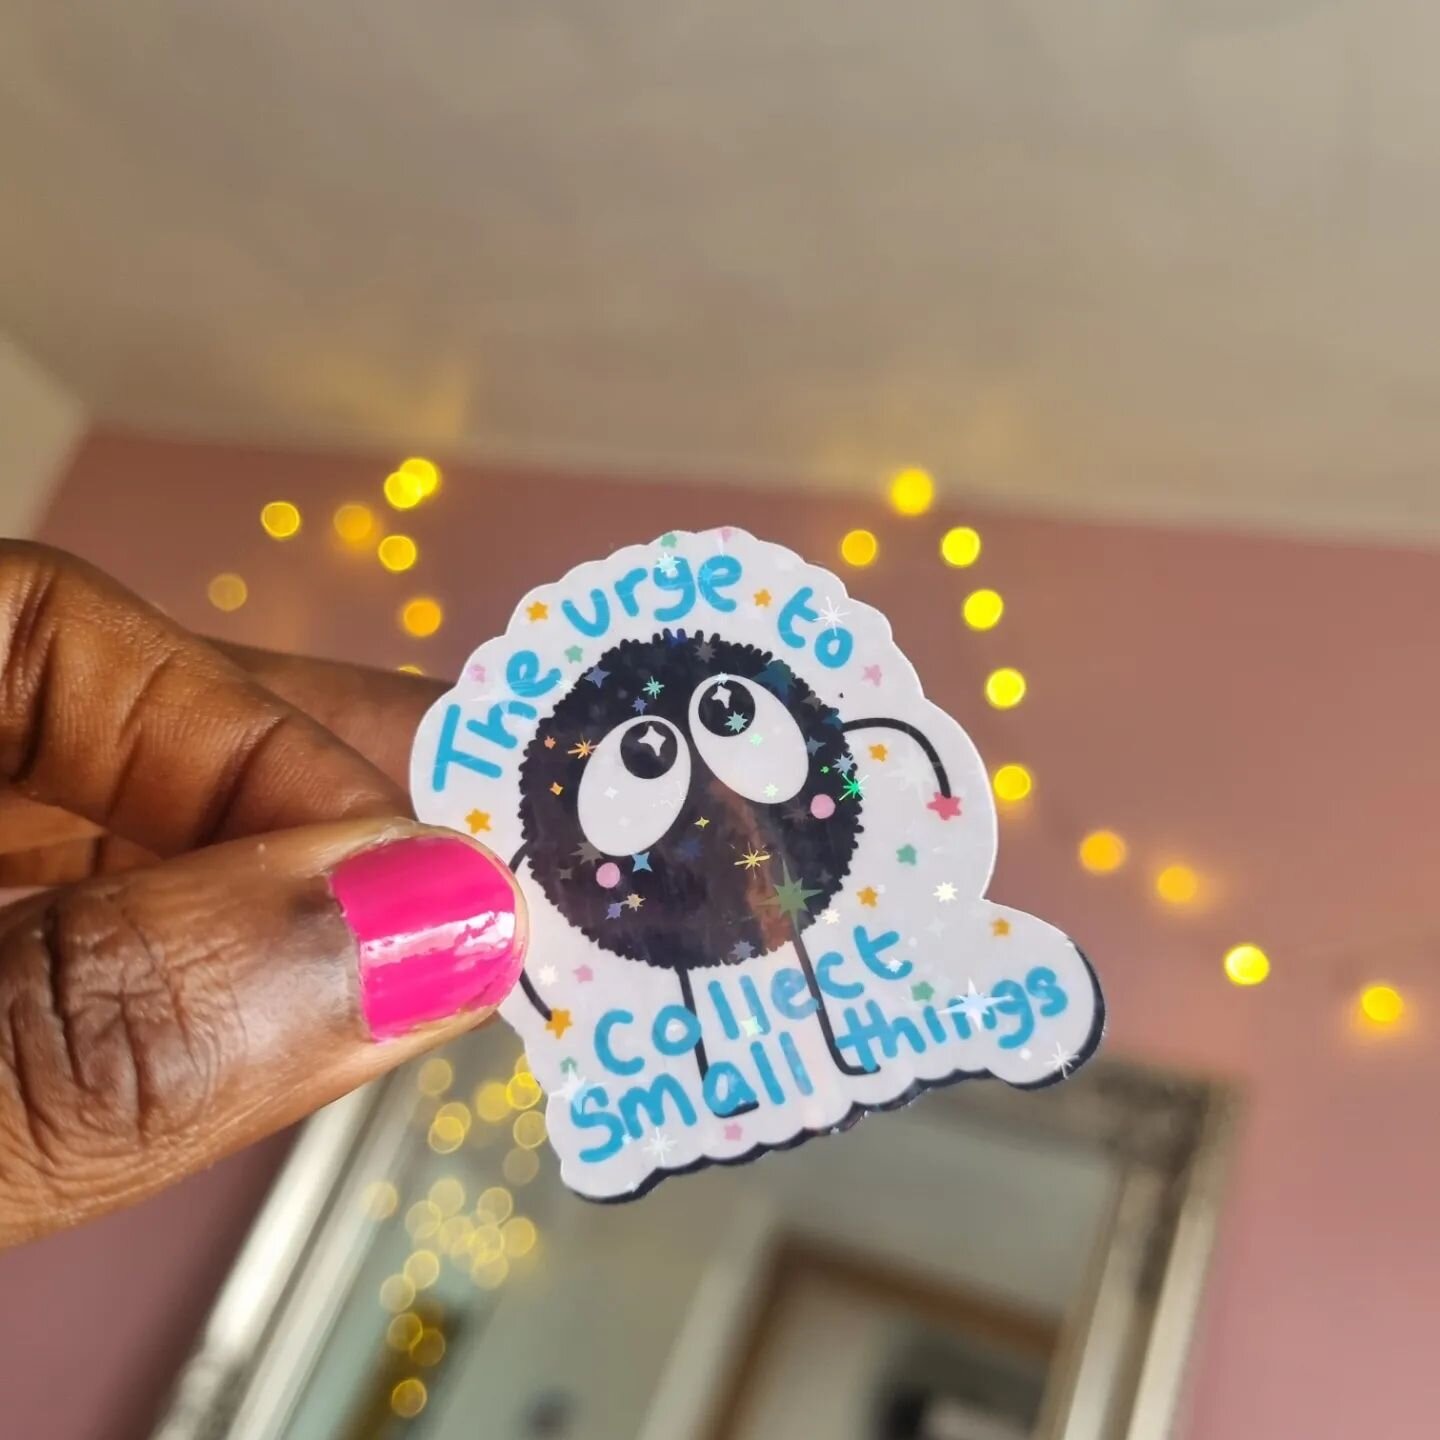 🥳Swipe to see the stickers added to the shop this week😍